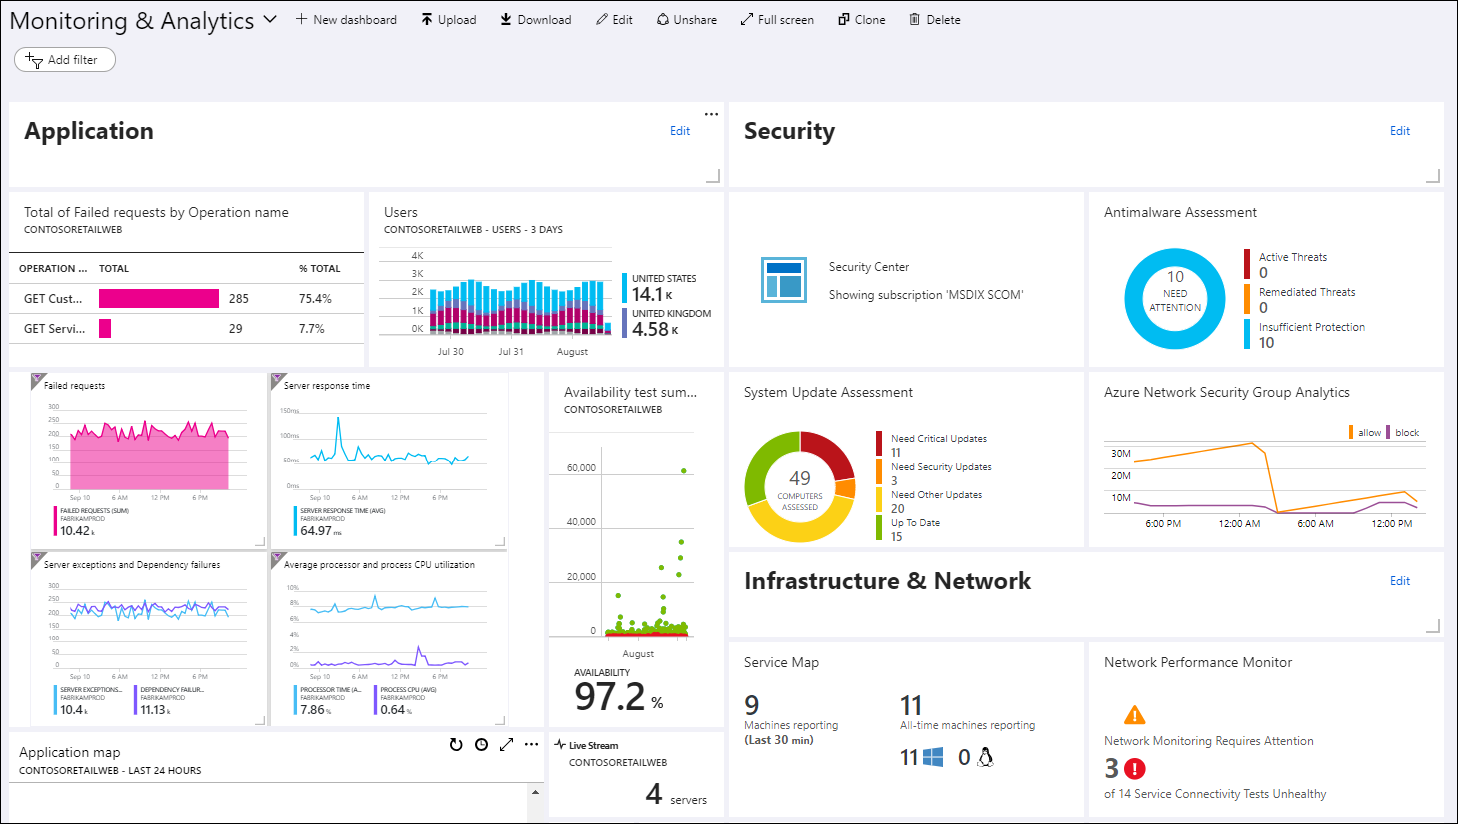 Screenshot shows an Azure Dashboard, which includes Application and Security tiles, along with other customizable information.